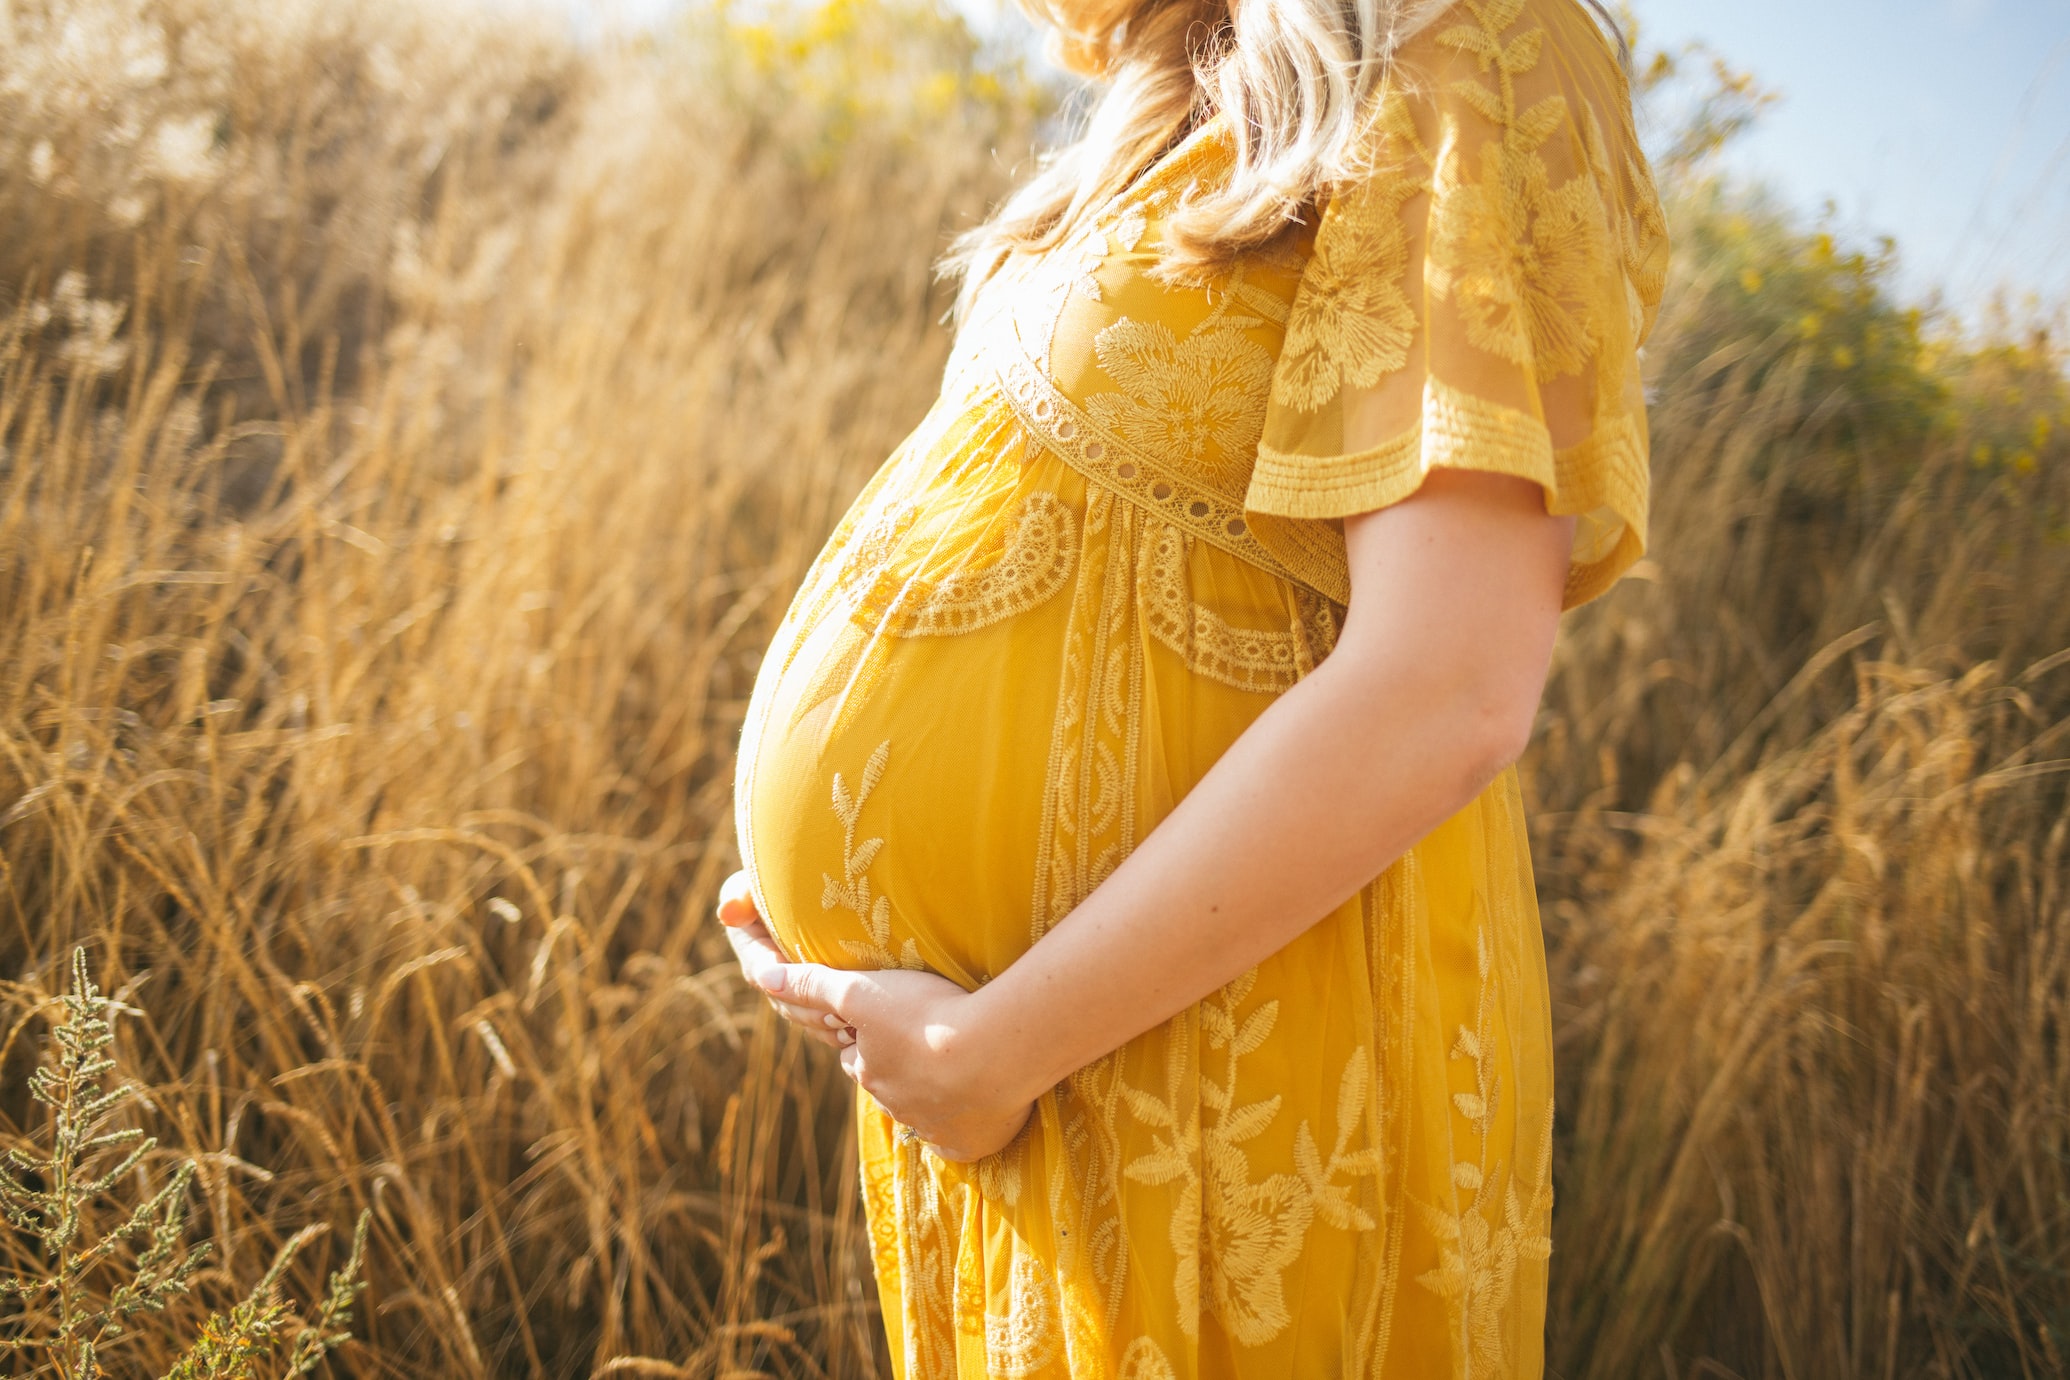 Can You Get a Personal Loan for Pregnancy-Related Expenses?